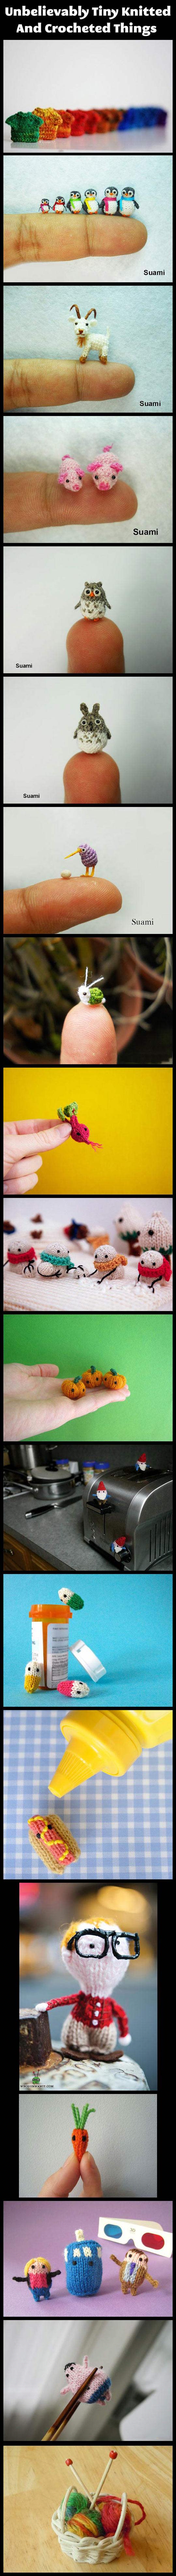 Tiny+Knitted+And+Crocheted+Creatures